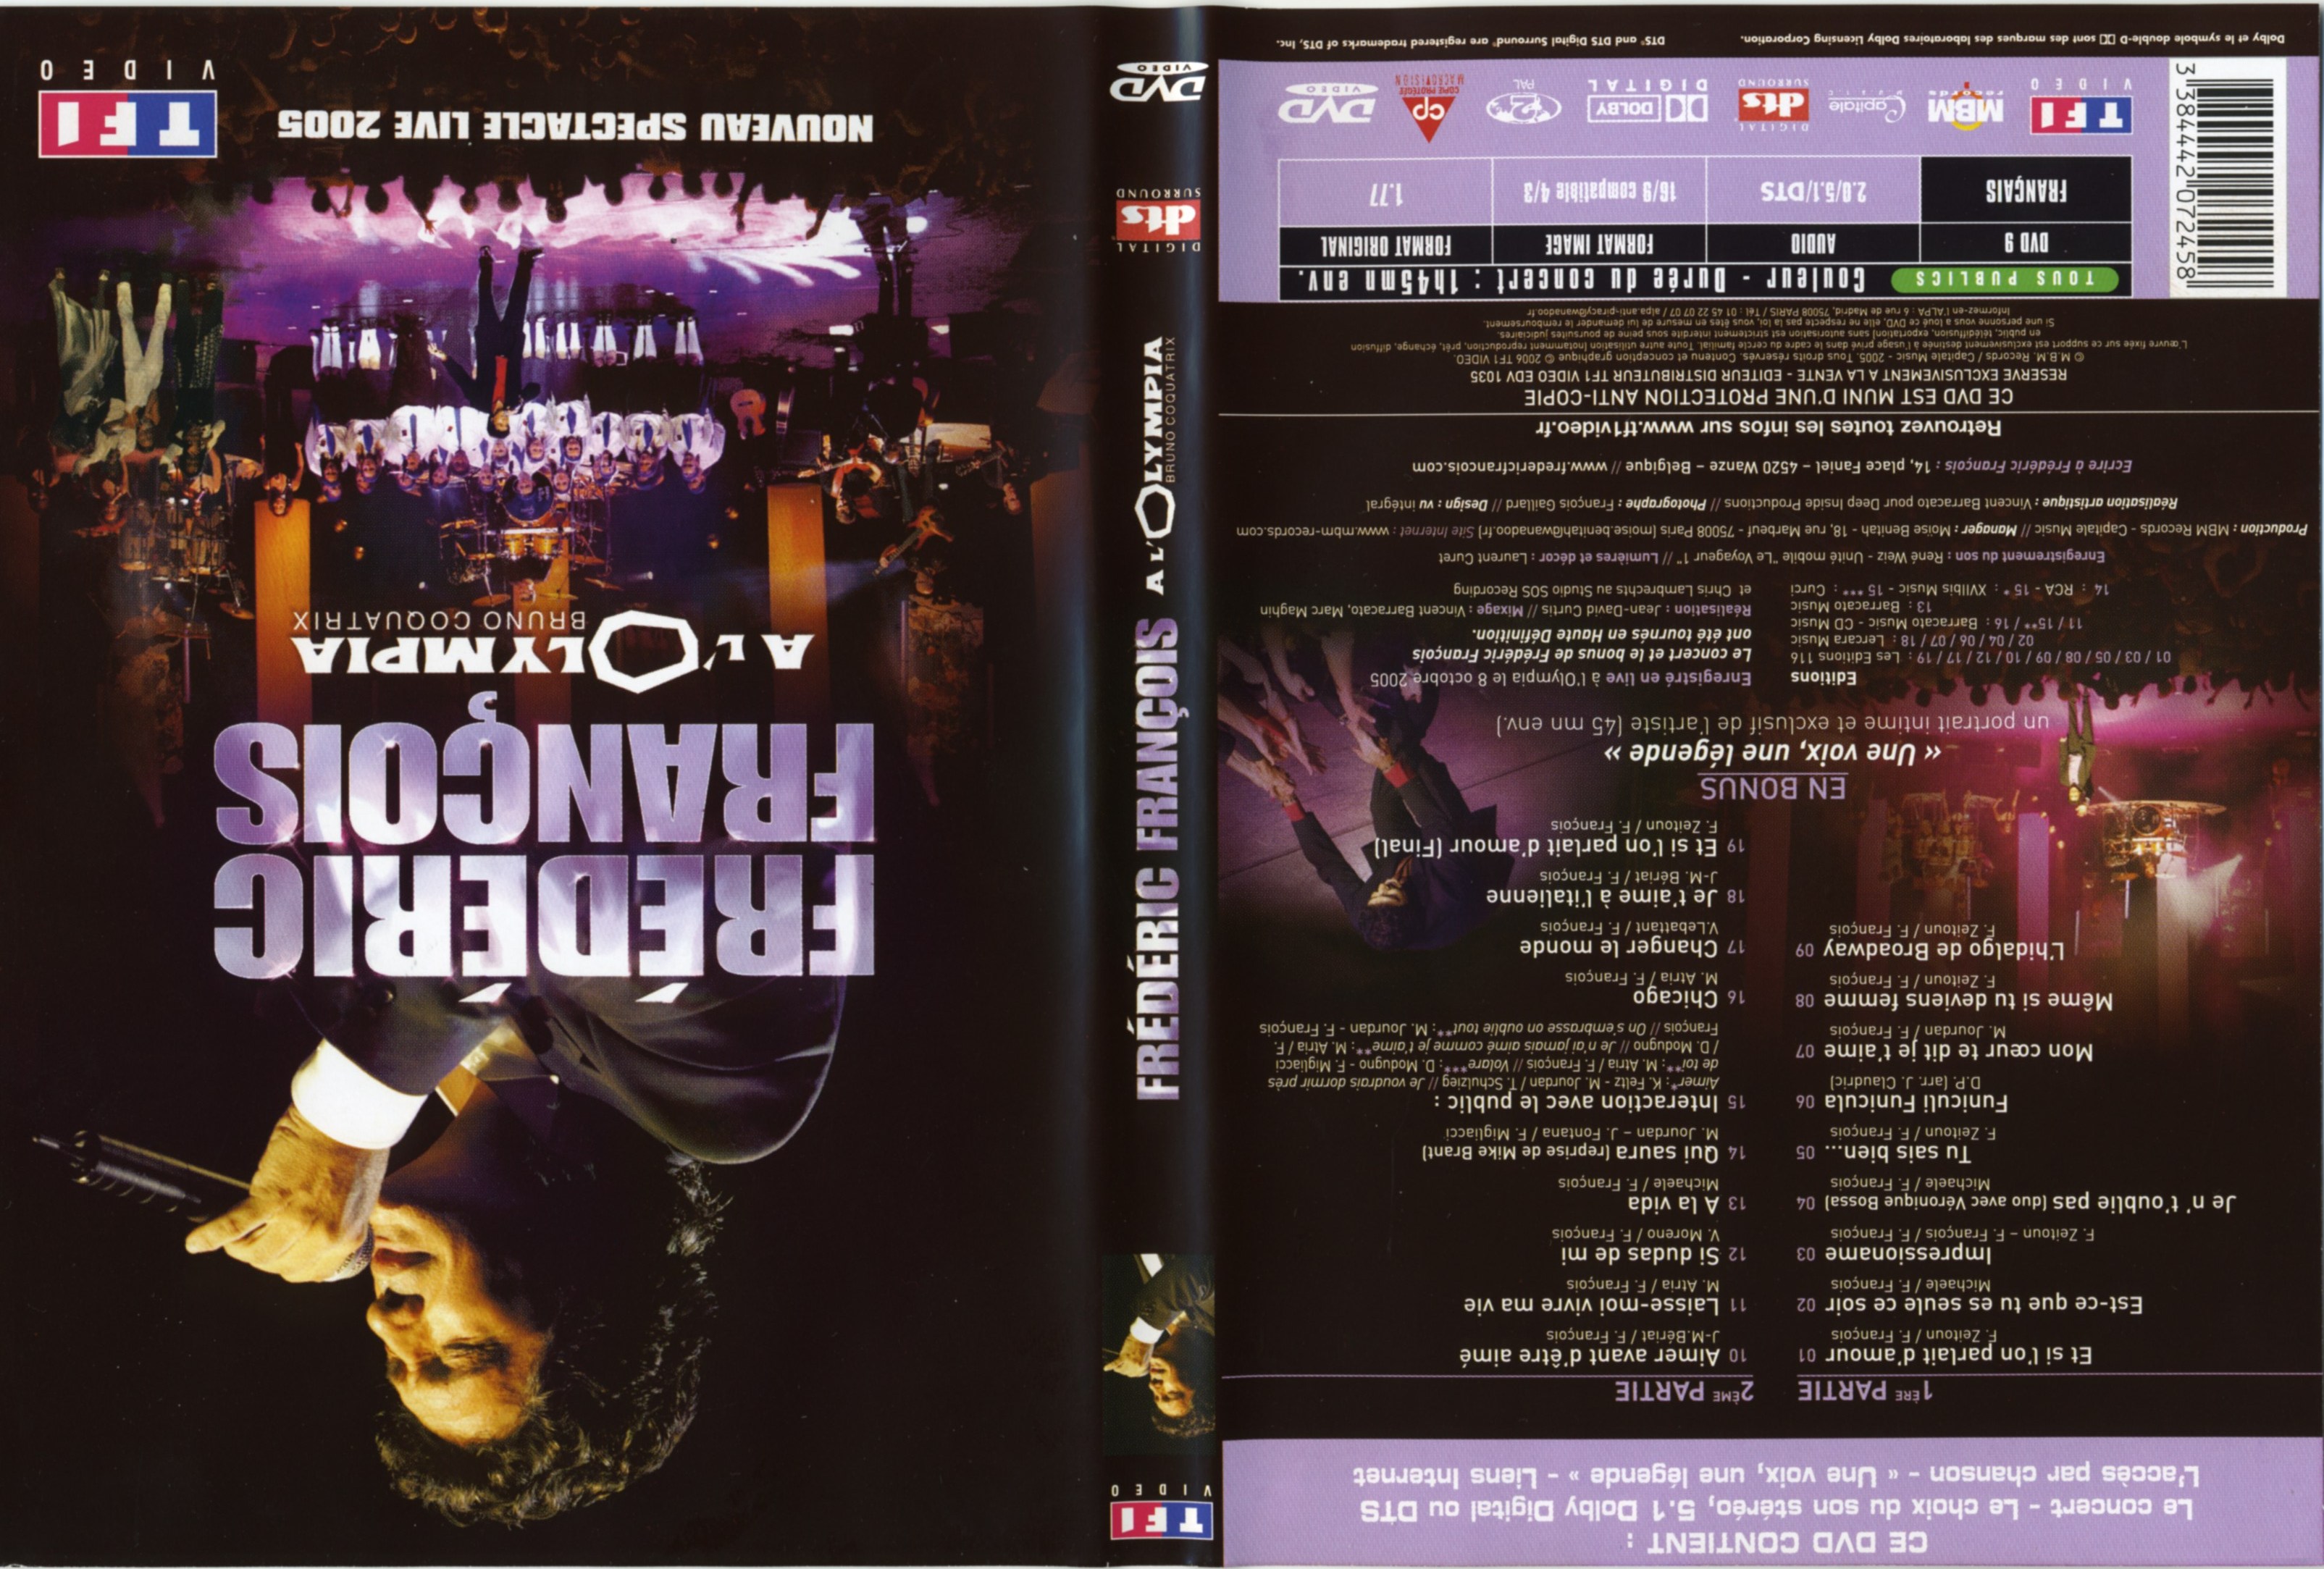 Jaquette DVD Frdric Francois - Olympia 2005